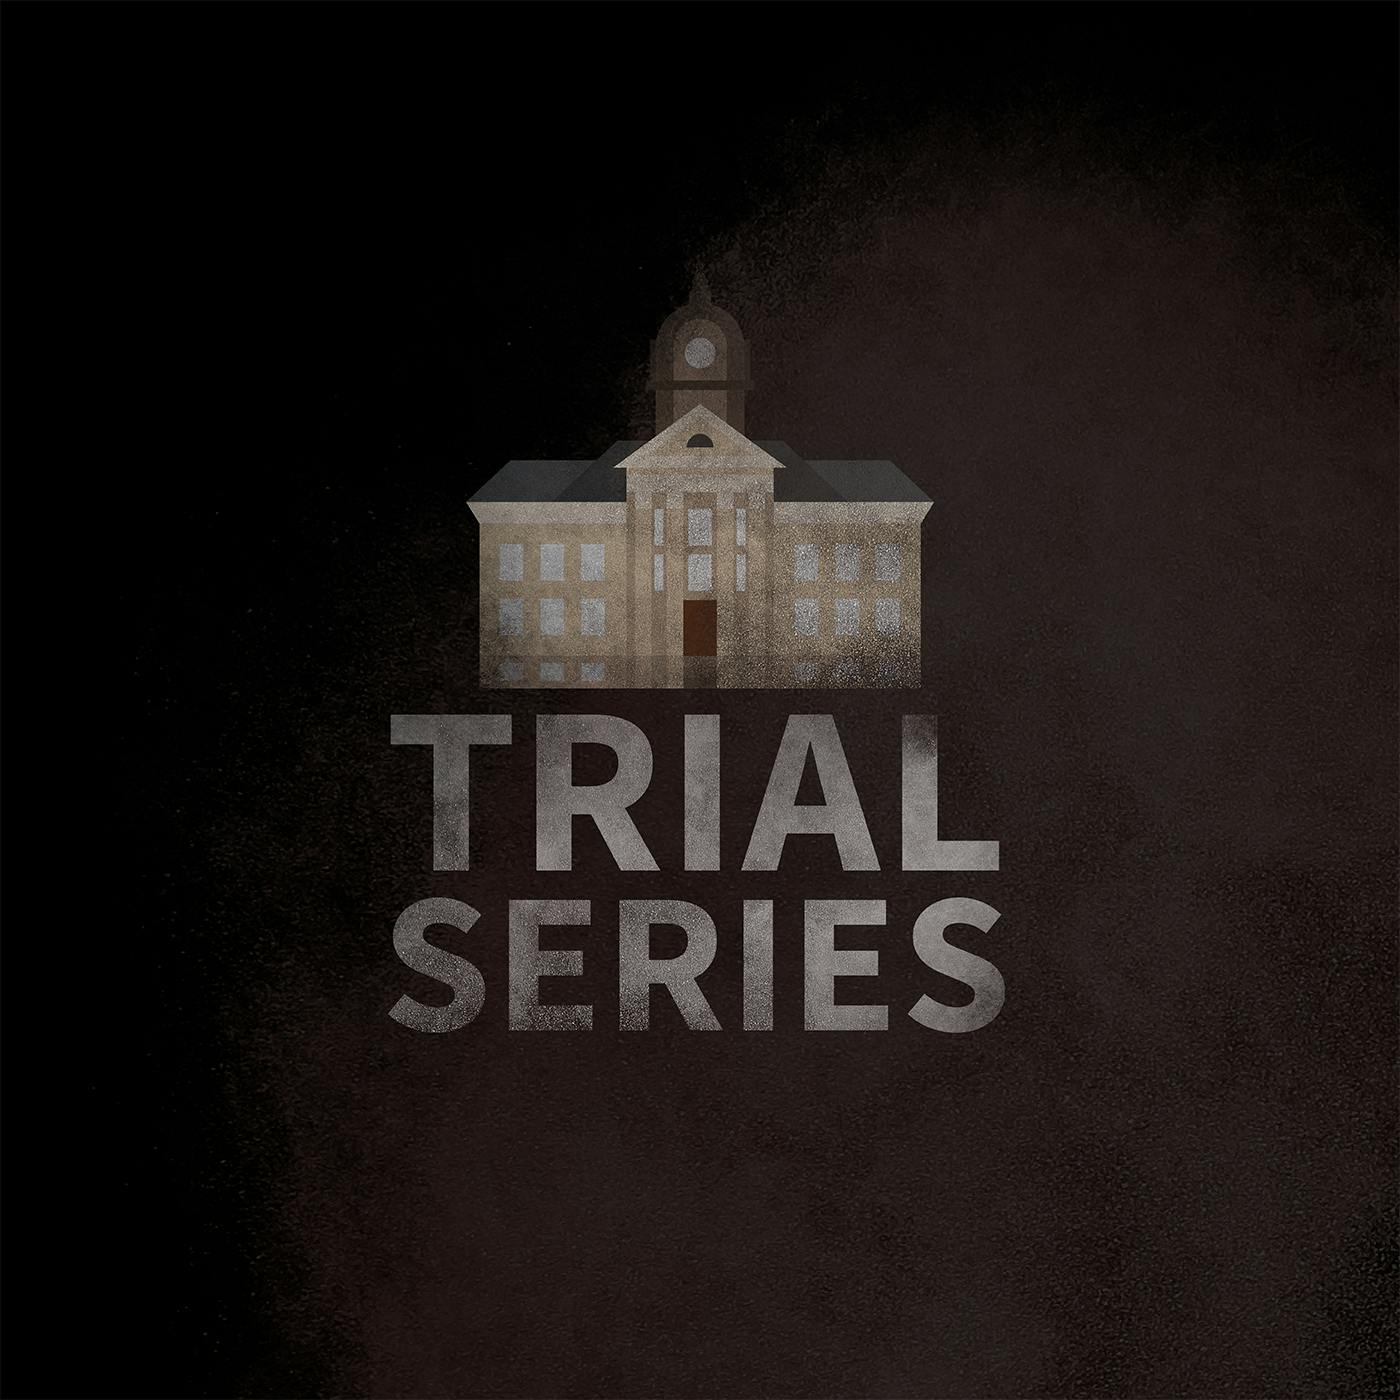 The Trial Series: What’s next?